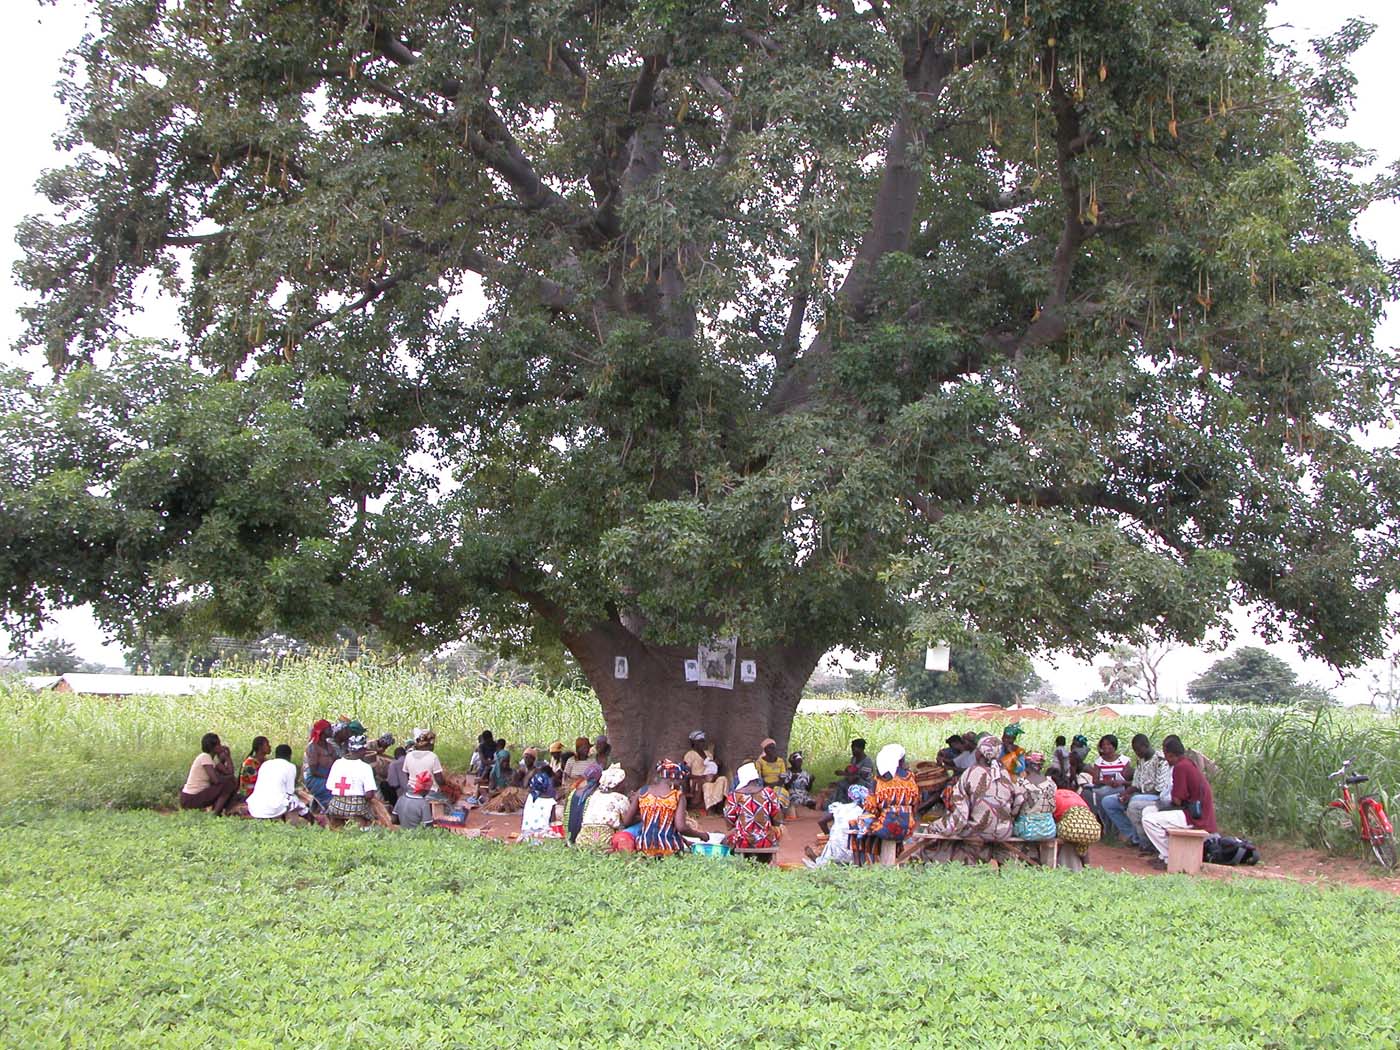 Baobab trees are a natural gathering place